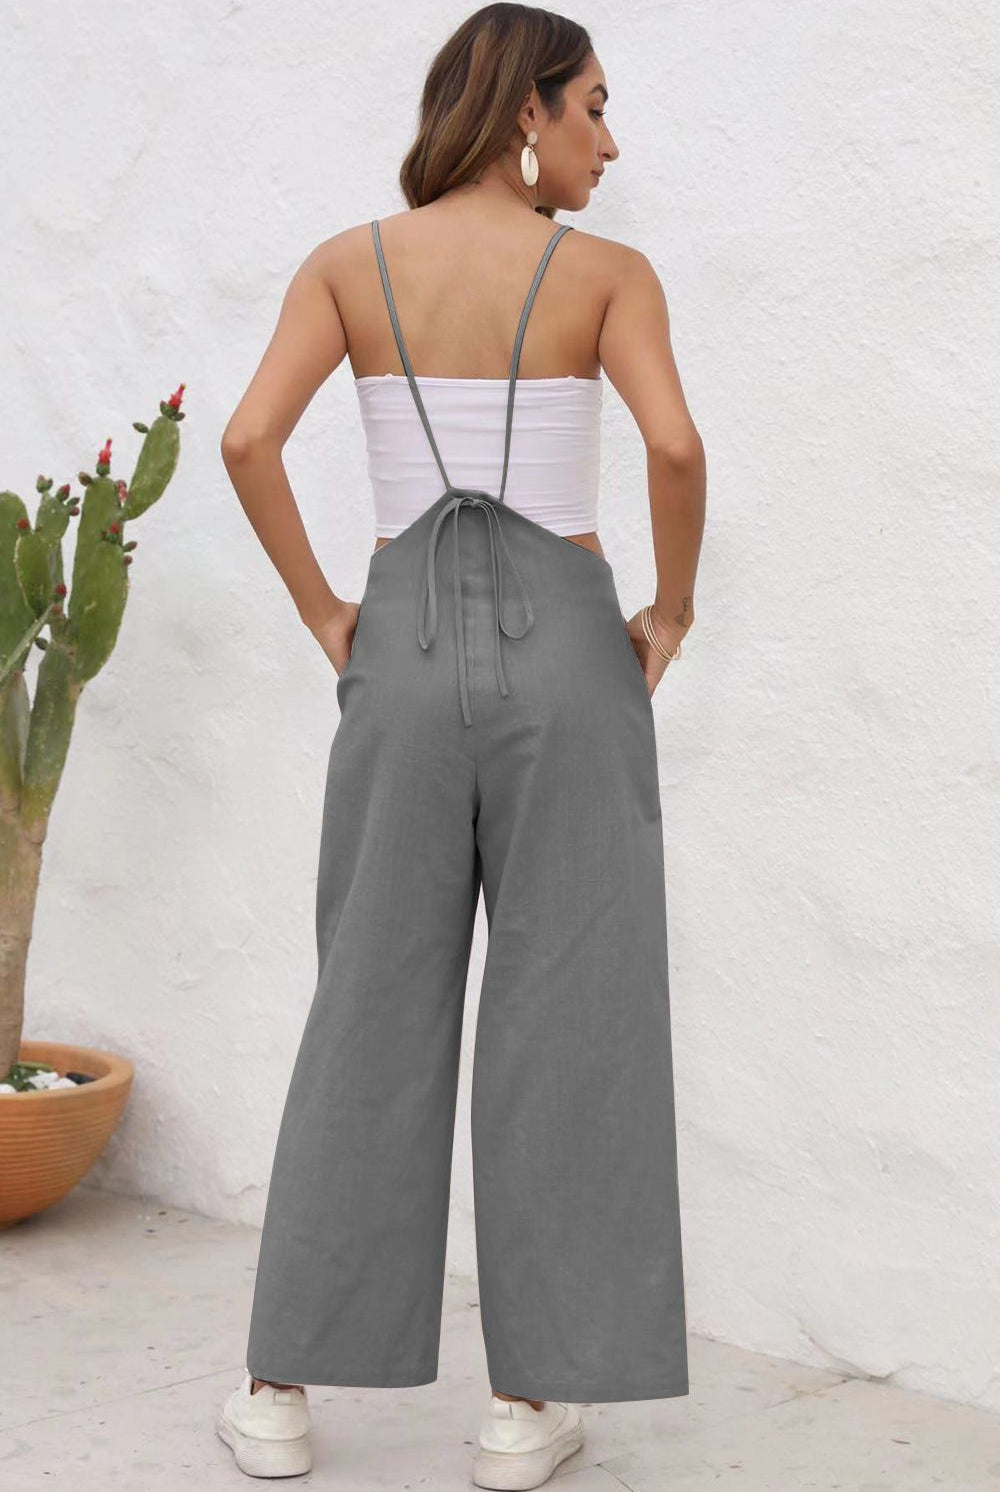 Stylish person posing in a sleeveless wide-leg jumpsuit, perfect for versatile looks.